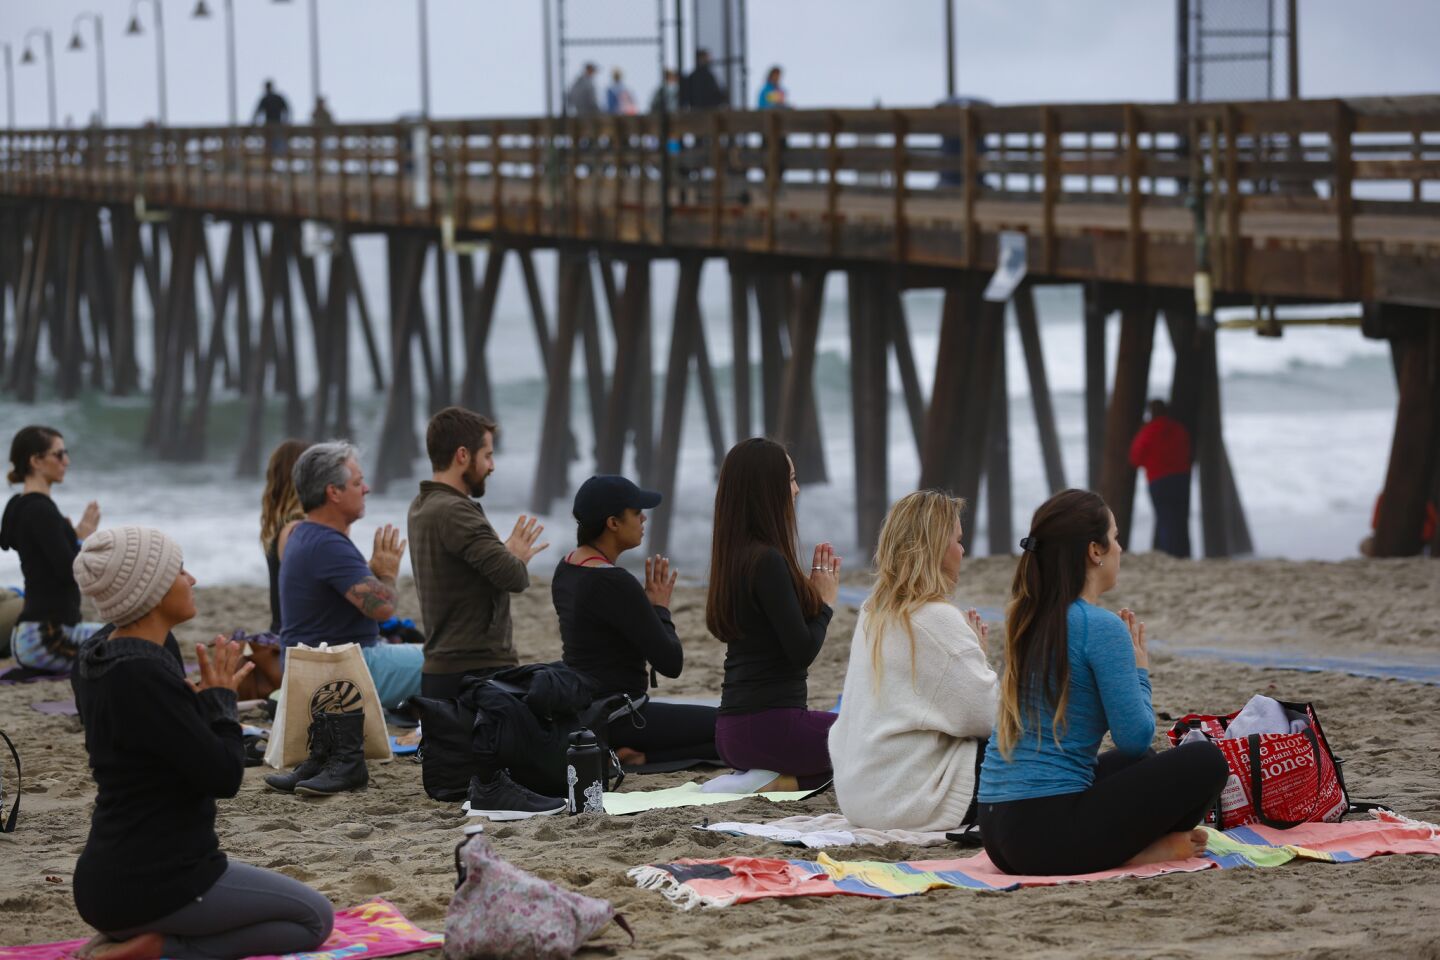 At the San Diego Yoga Festival held in Imperial Beach, several participants took part in the morning yoga session held Sunday on the sand near the Imperial Beach Pier.